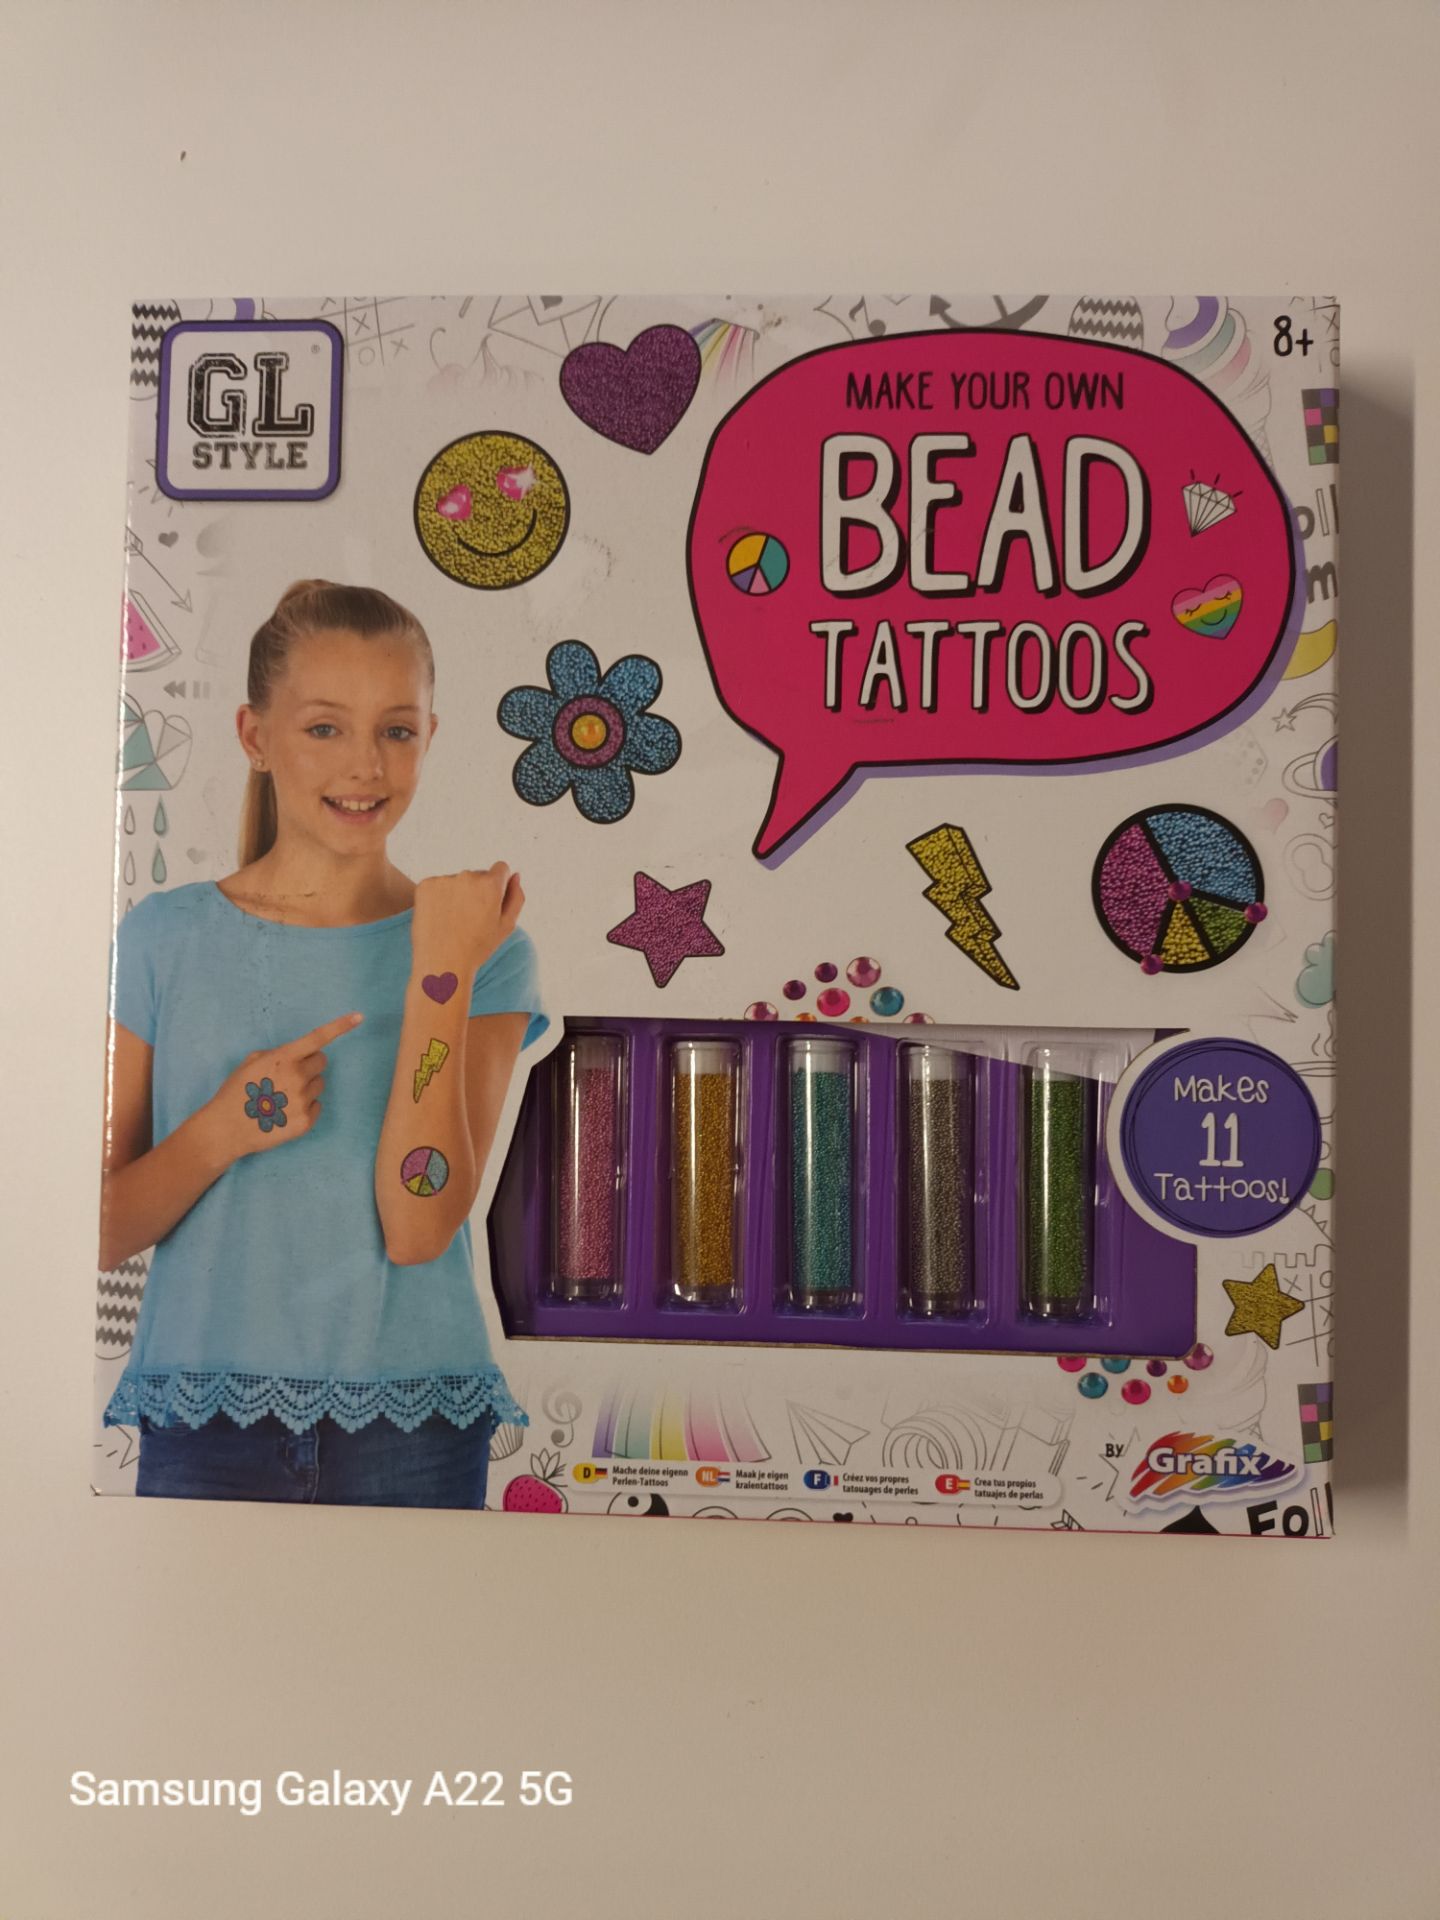 755 UNITS - SEE DESCRIPTION - NEW STOCK MIXED SCIENCE KITS, BEAD TATTOOS & SLIME KITS - Image 2 of 3